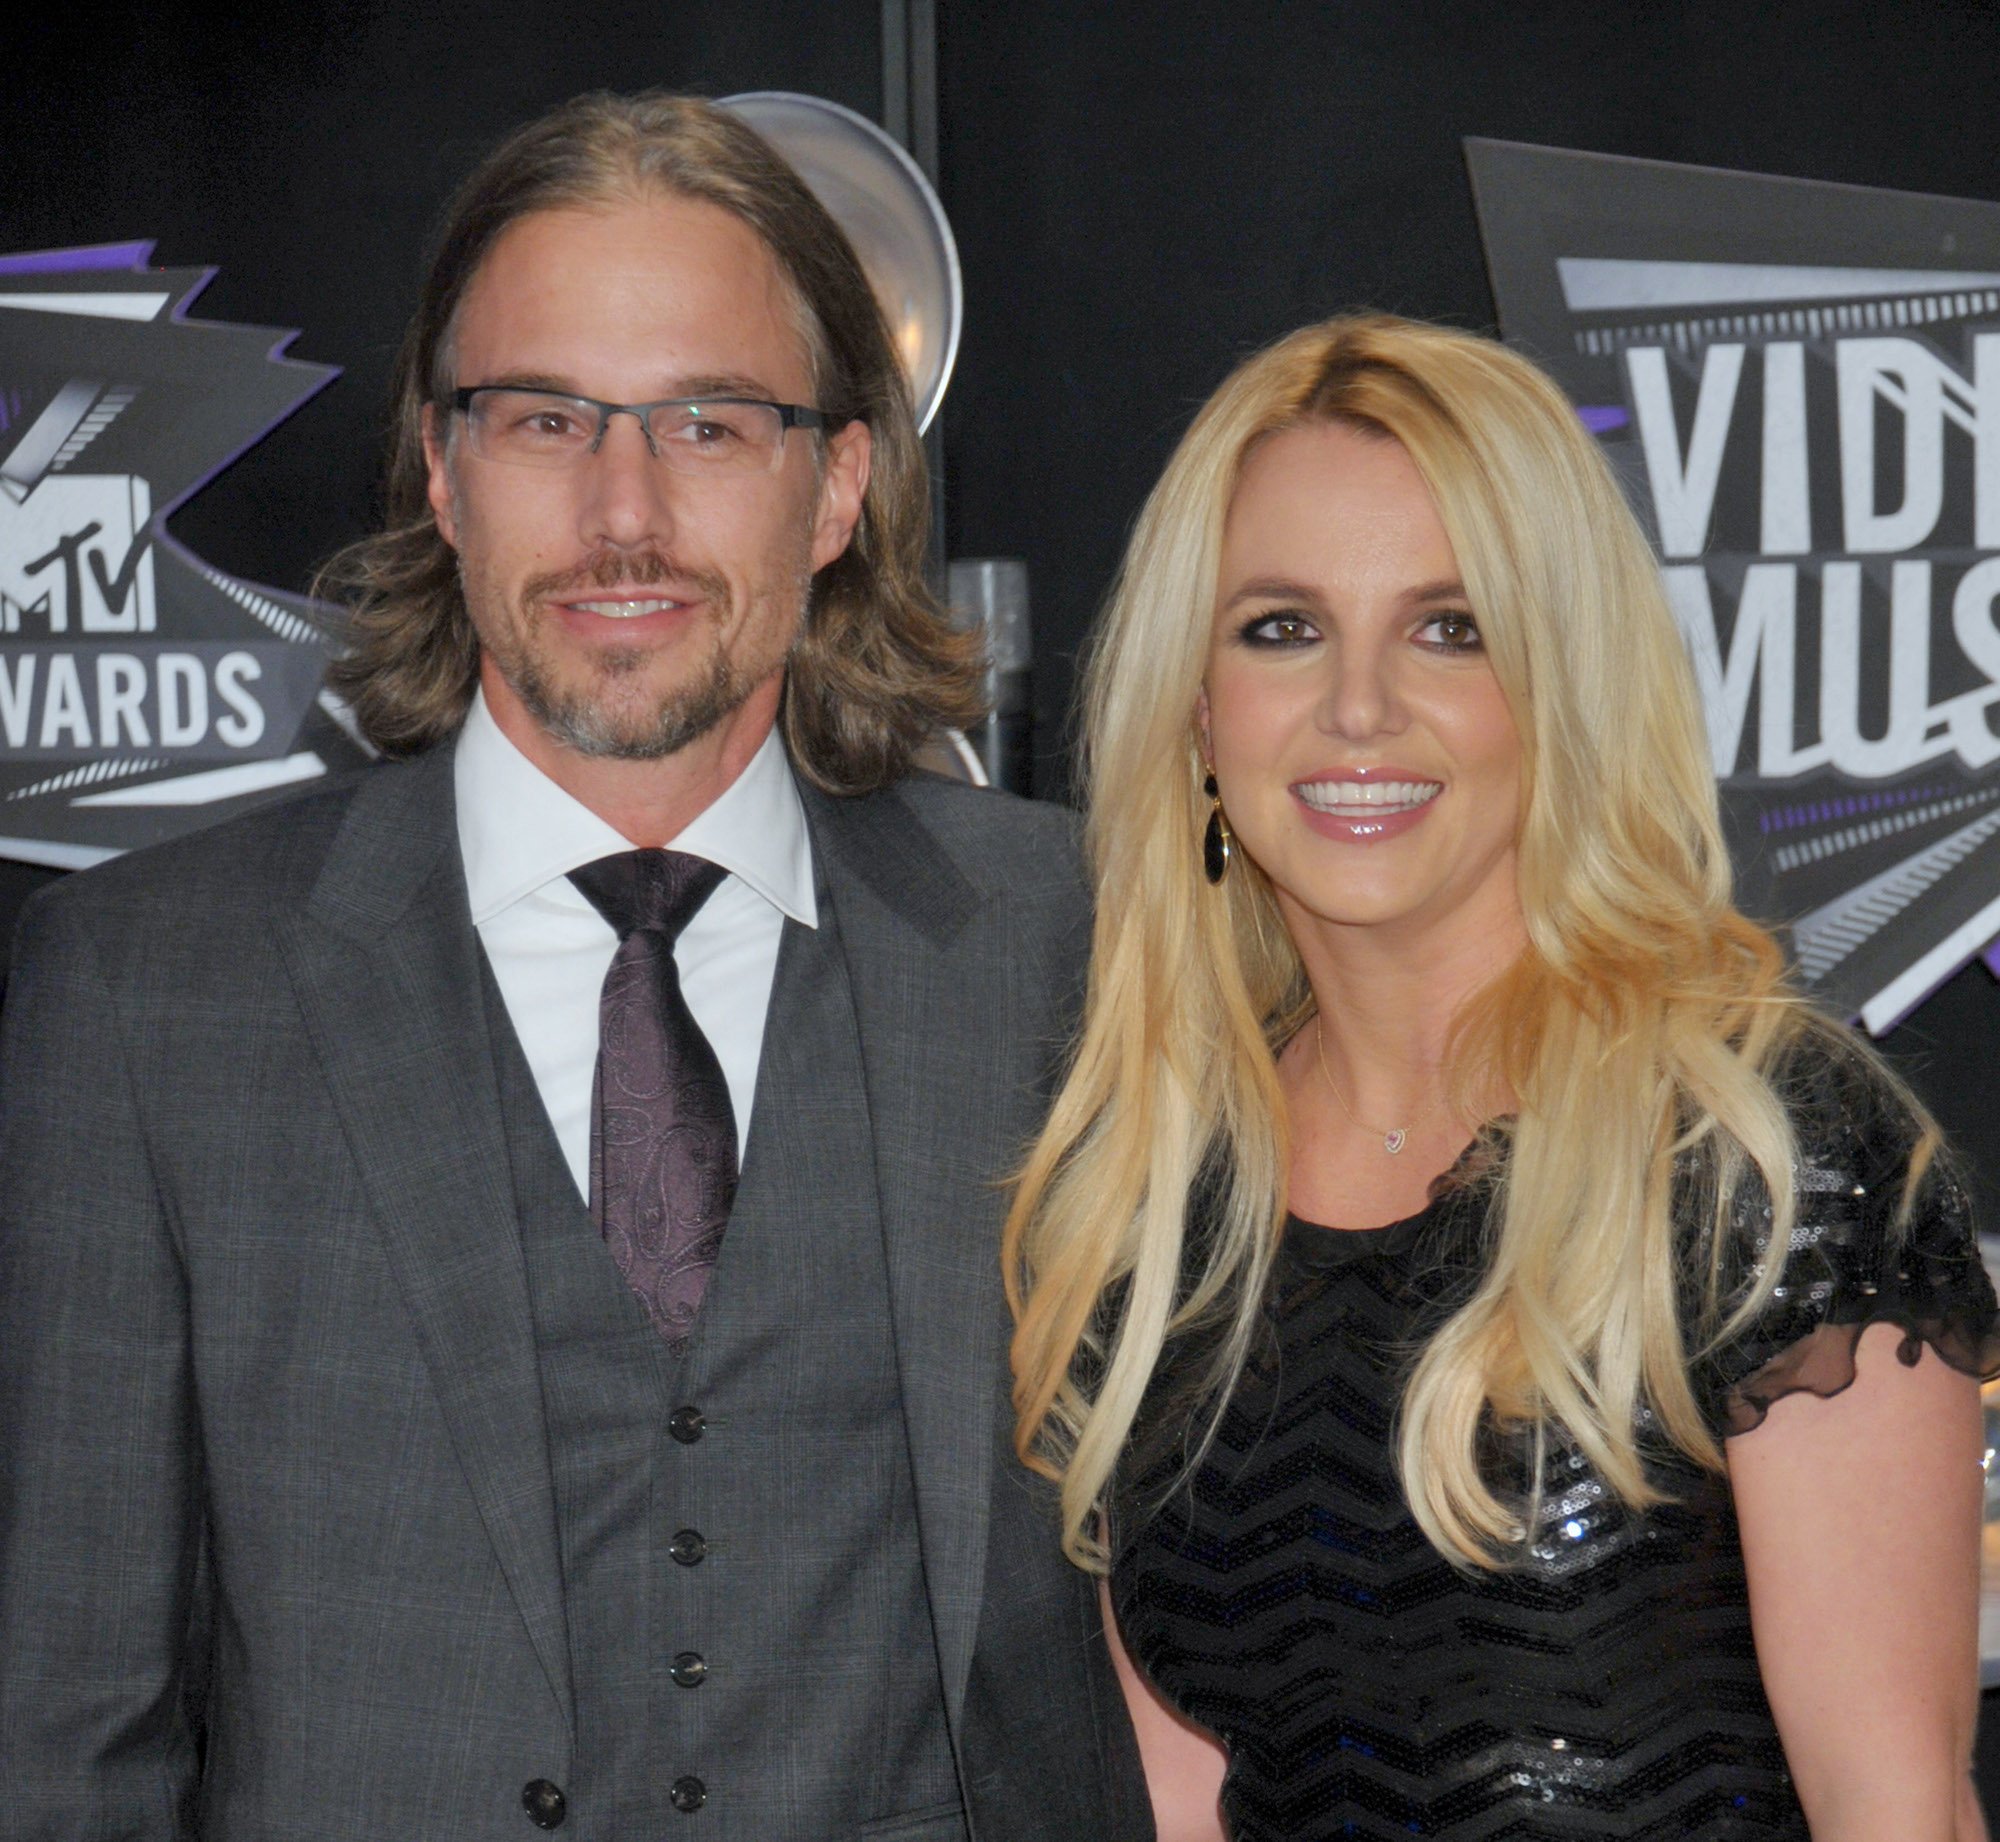 Brtiney Spears posing with her ex-fiancé Jason Trawick on the red carpet at the 2011 MTV Video Music Awards